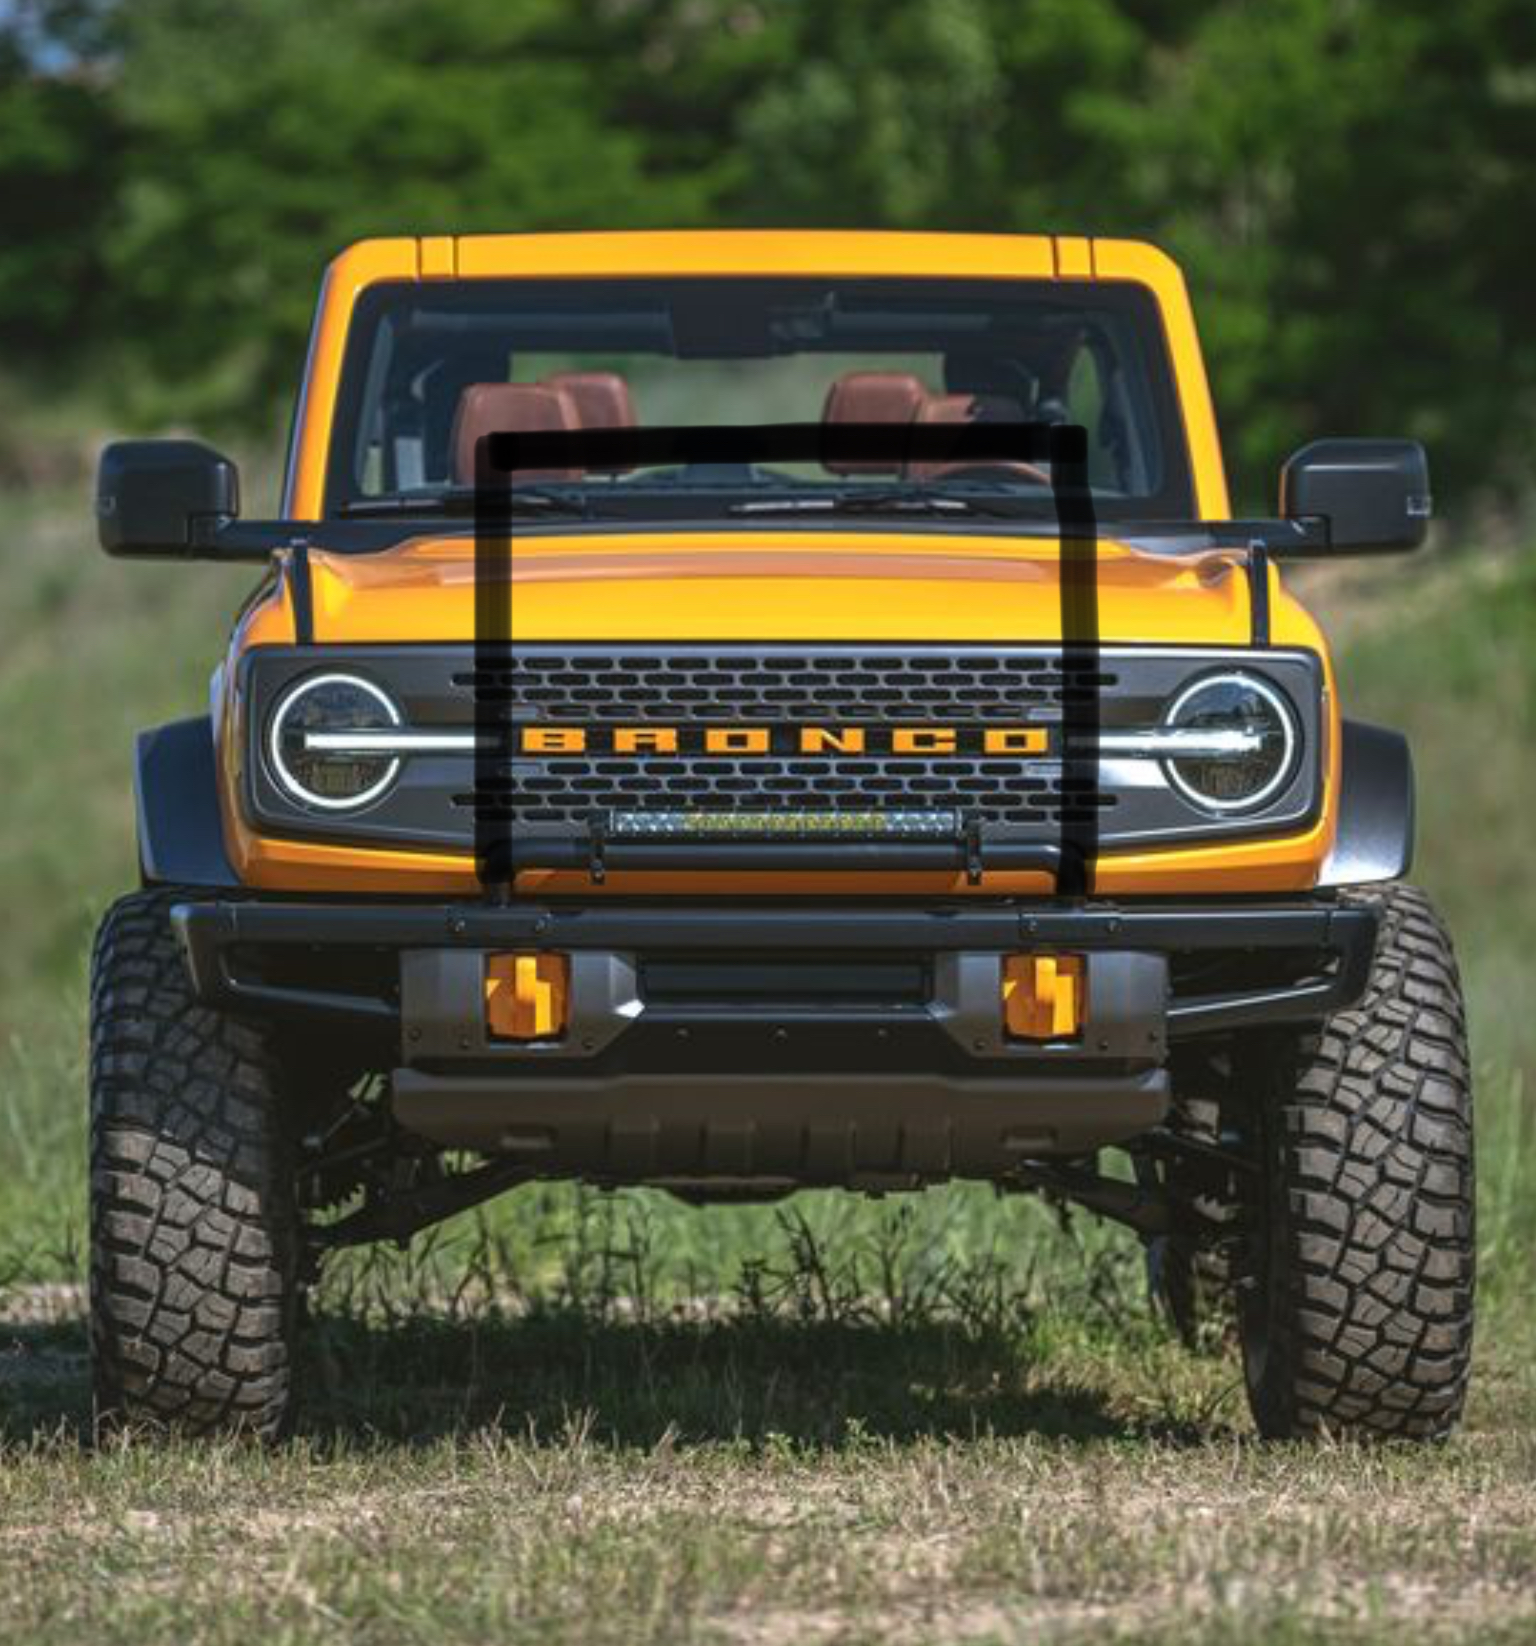 Ford Bronco Brush Guard design changed to avoid blocking Bronco grille letters 869EED53-94DD-4F78-935D-2D7A4259B3D1